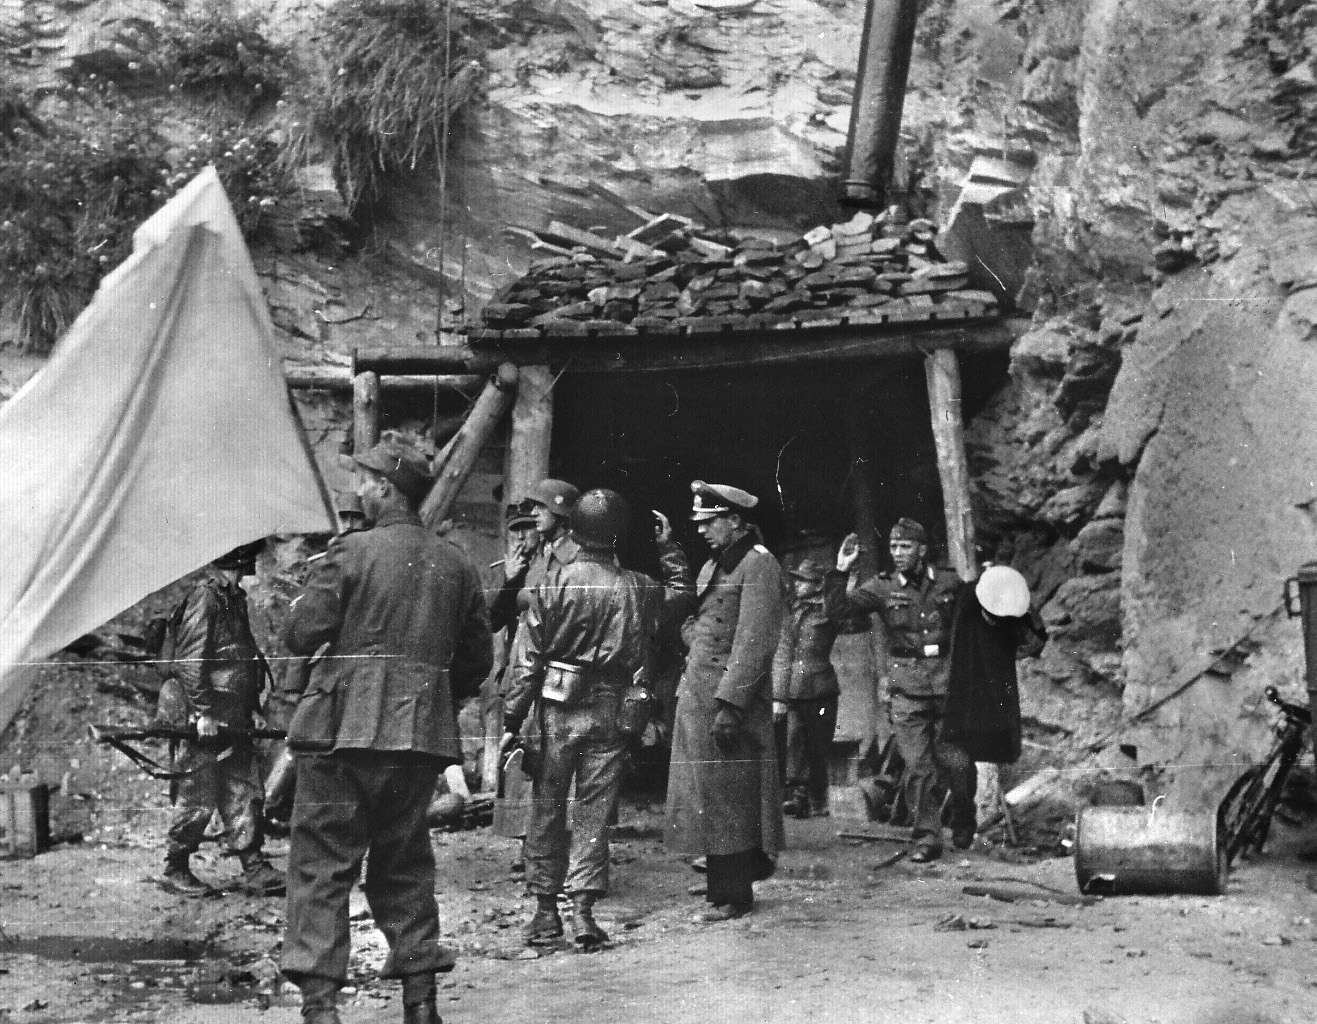 General Wilhelm von Schlieben, commander of the German garrison of Cherbourg, and Rear Admiral Walter Hennecke, commander of the seaward defenses of the city and throughout the region of Normandy, come out of their command bunker to surrender to American soldiers.